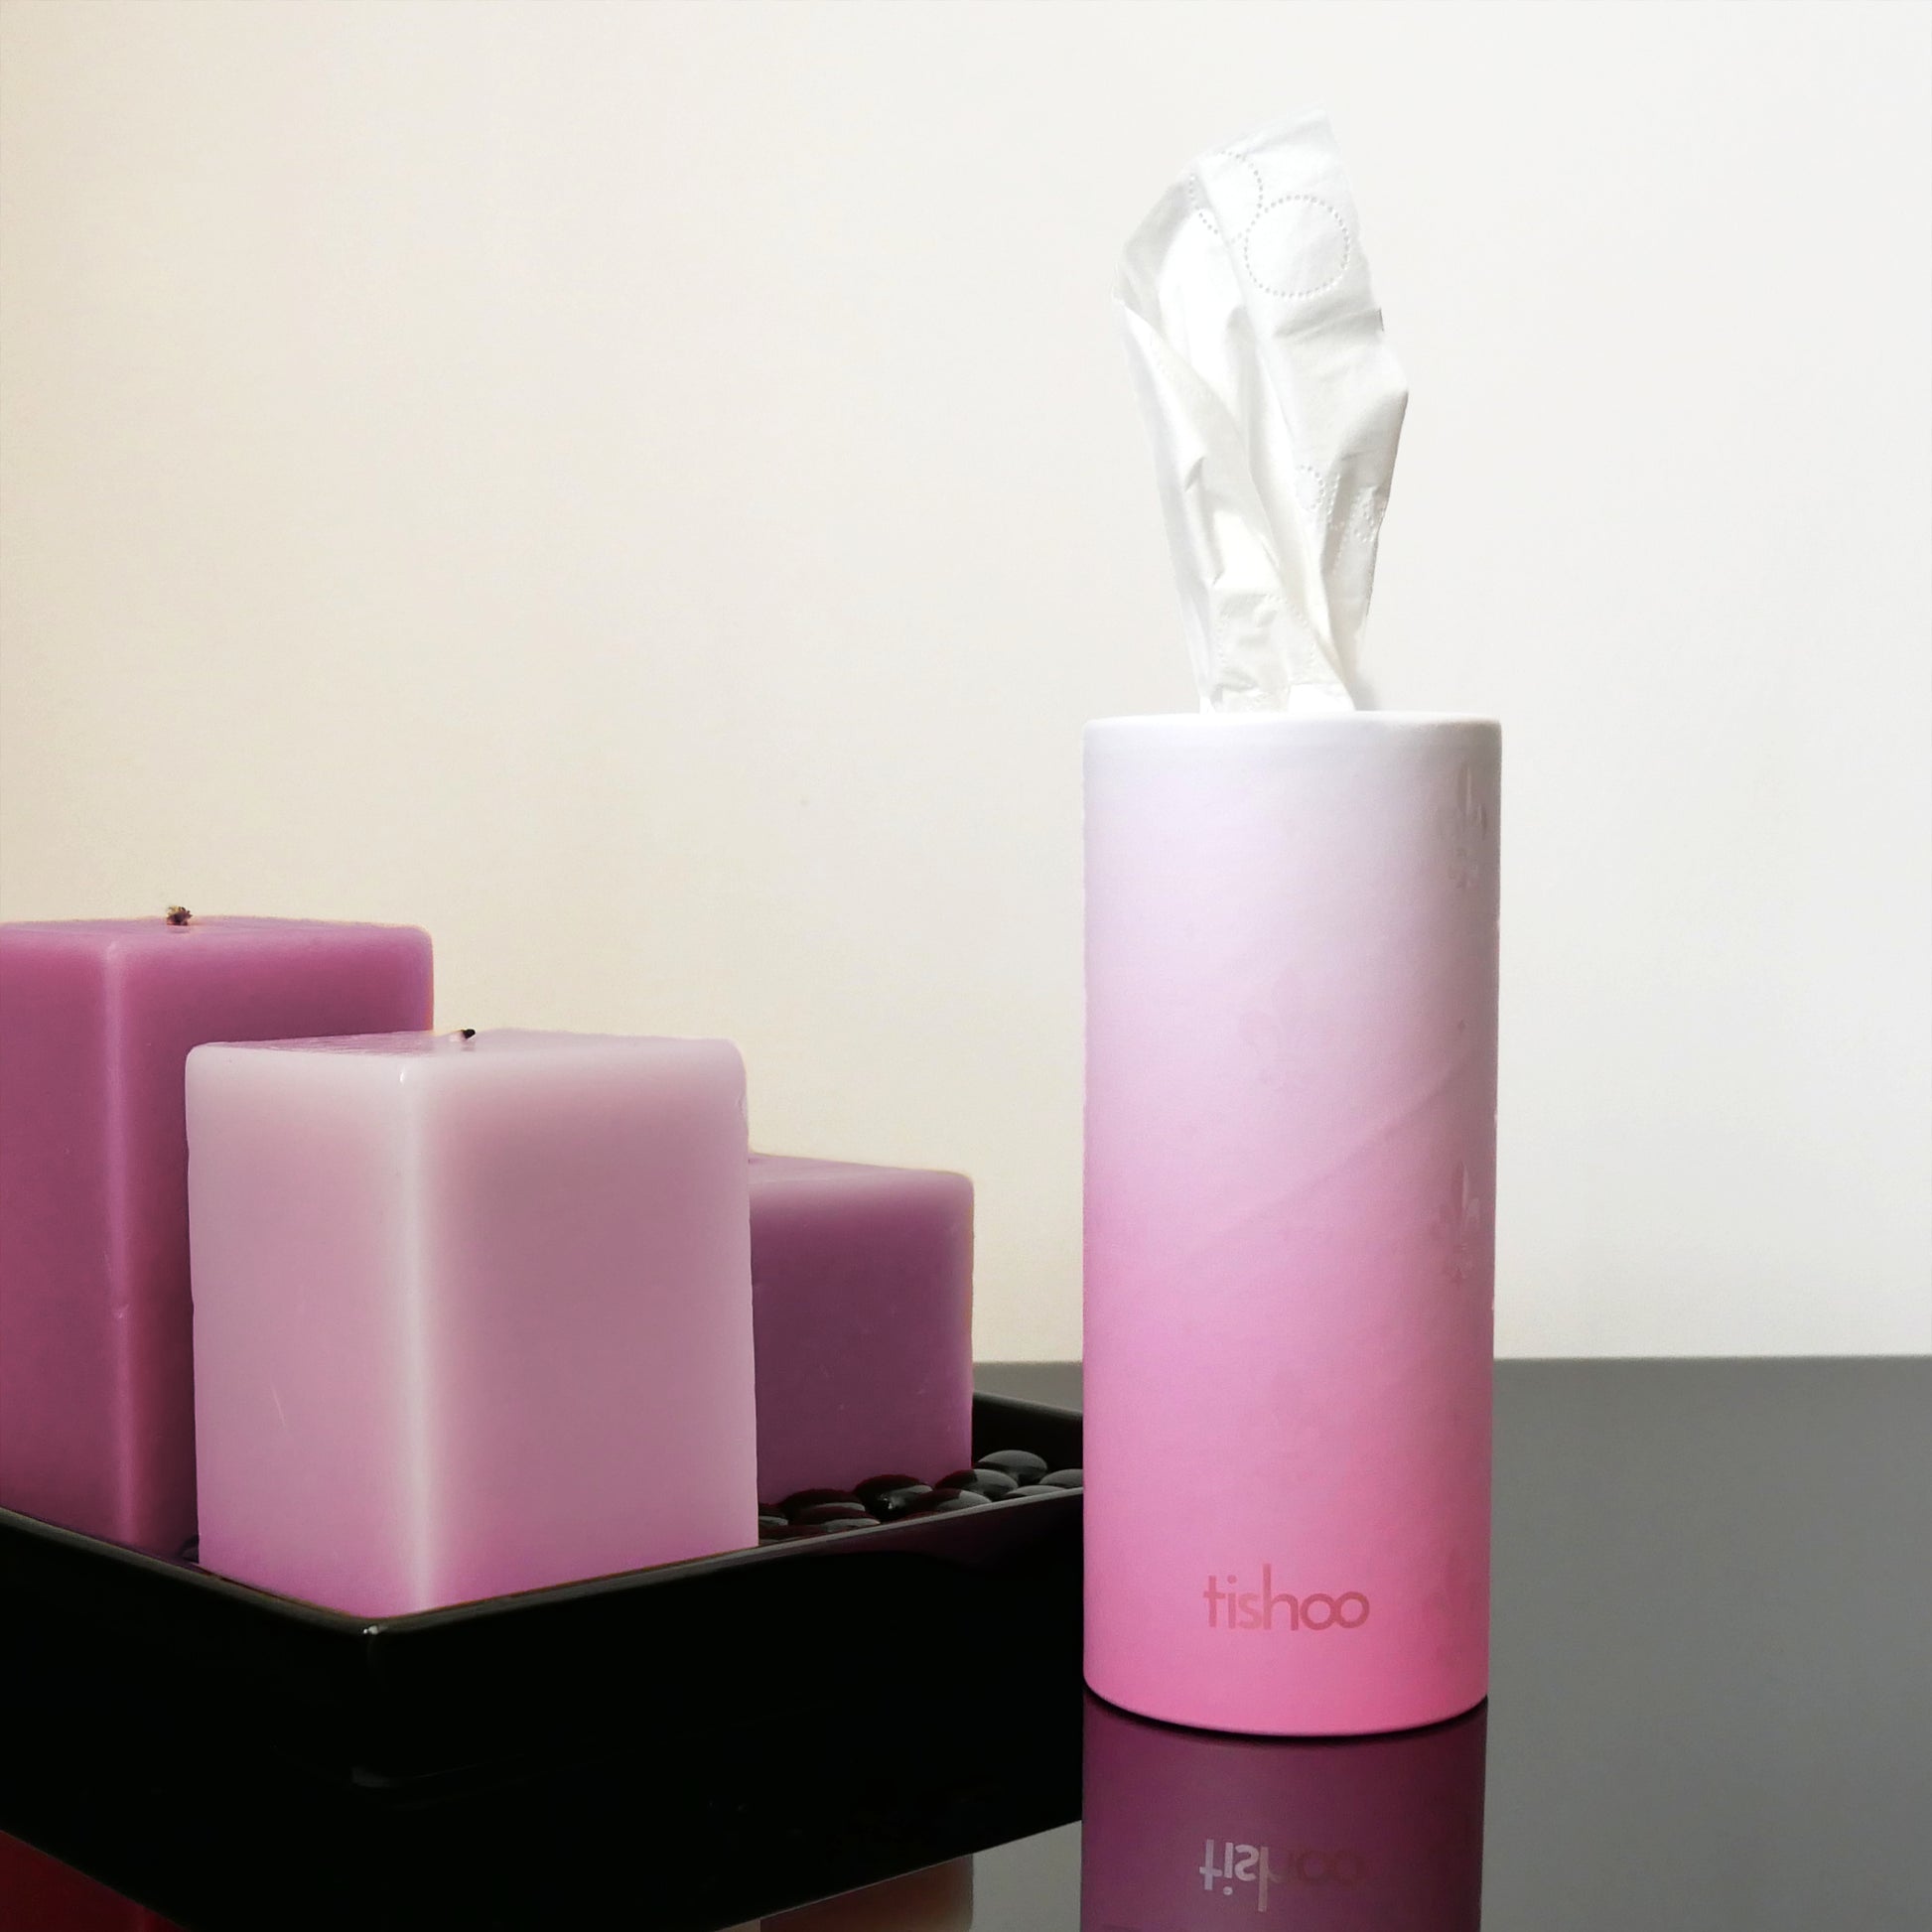 tishoo Luxury Tissues Pink/Rose design on table next to candle